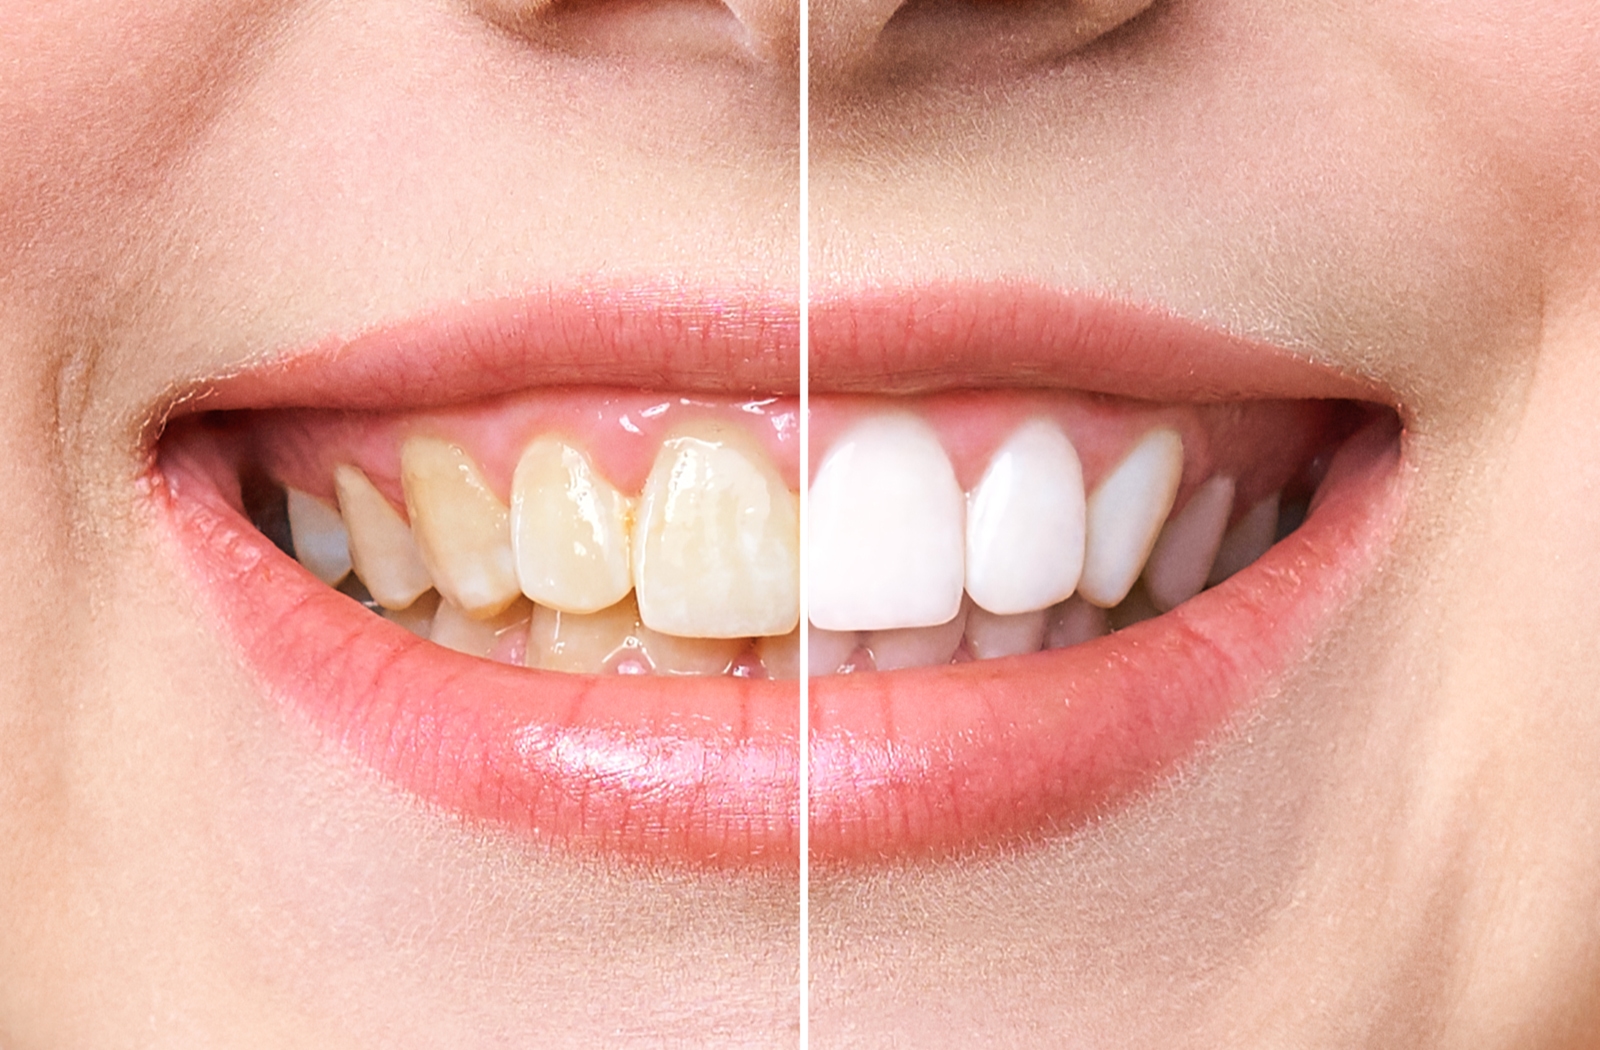 The before and after of a professional teeth whitening